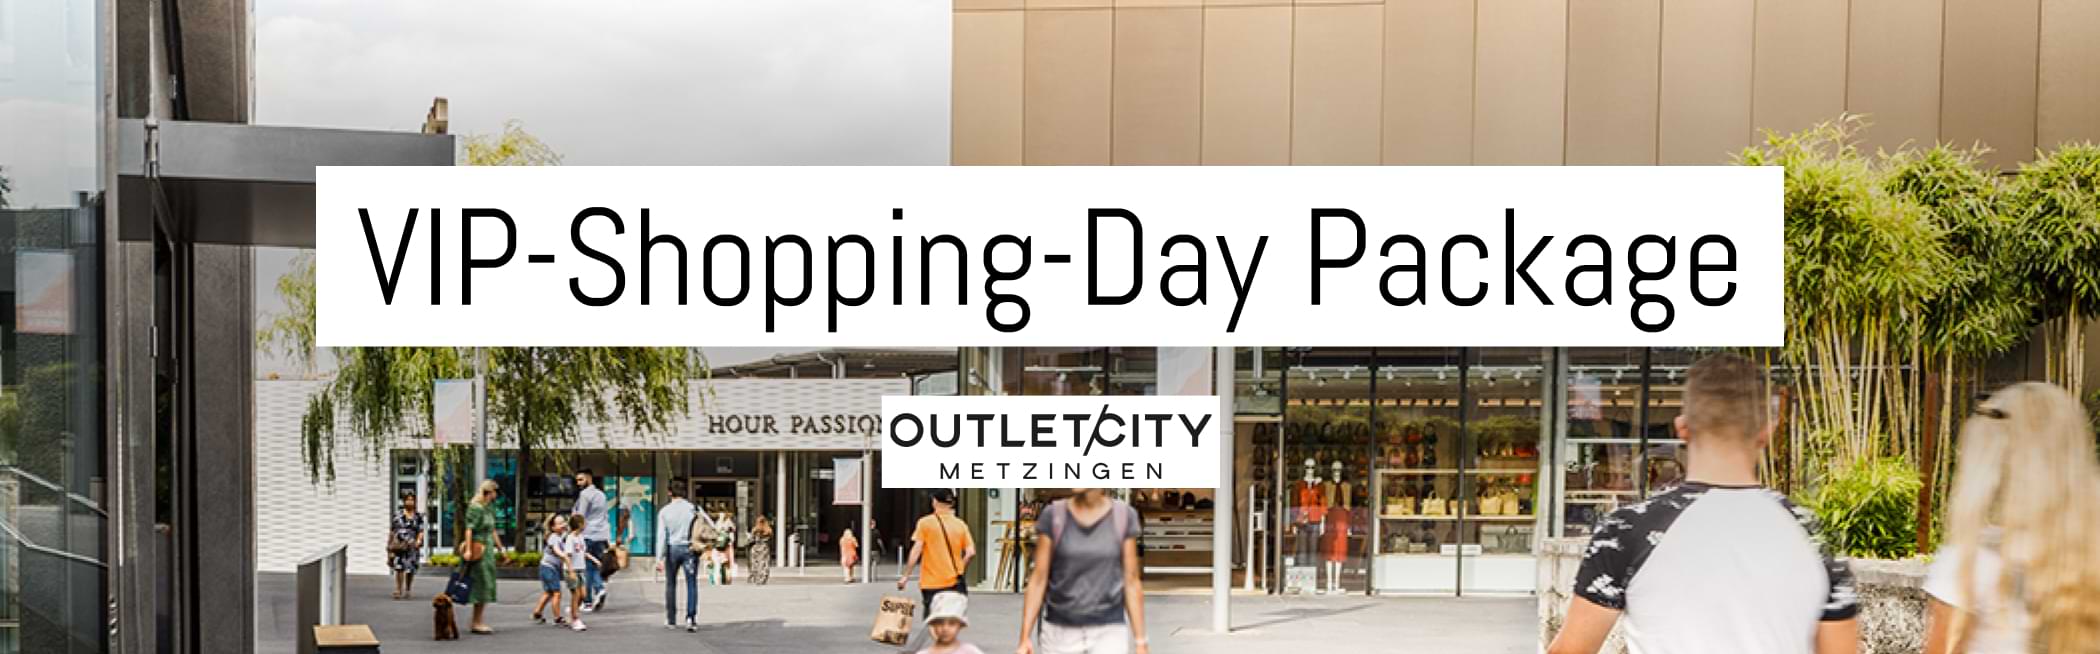 VIP-Shopping-Day Package OutletCity Metzingen